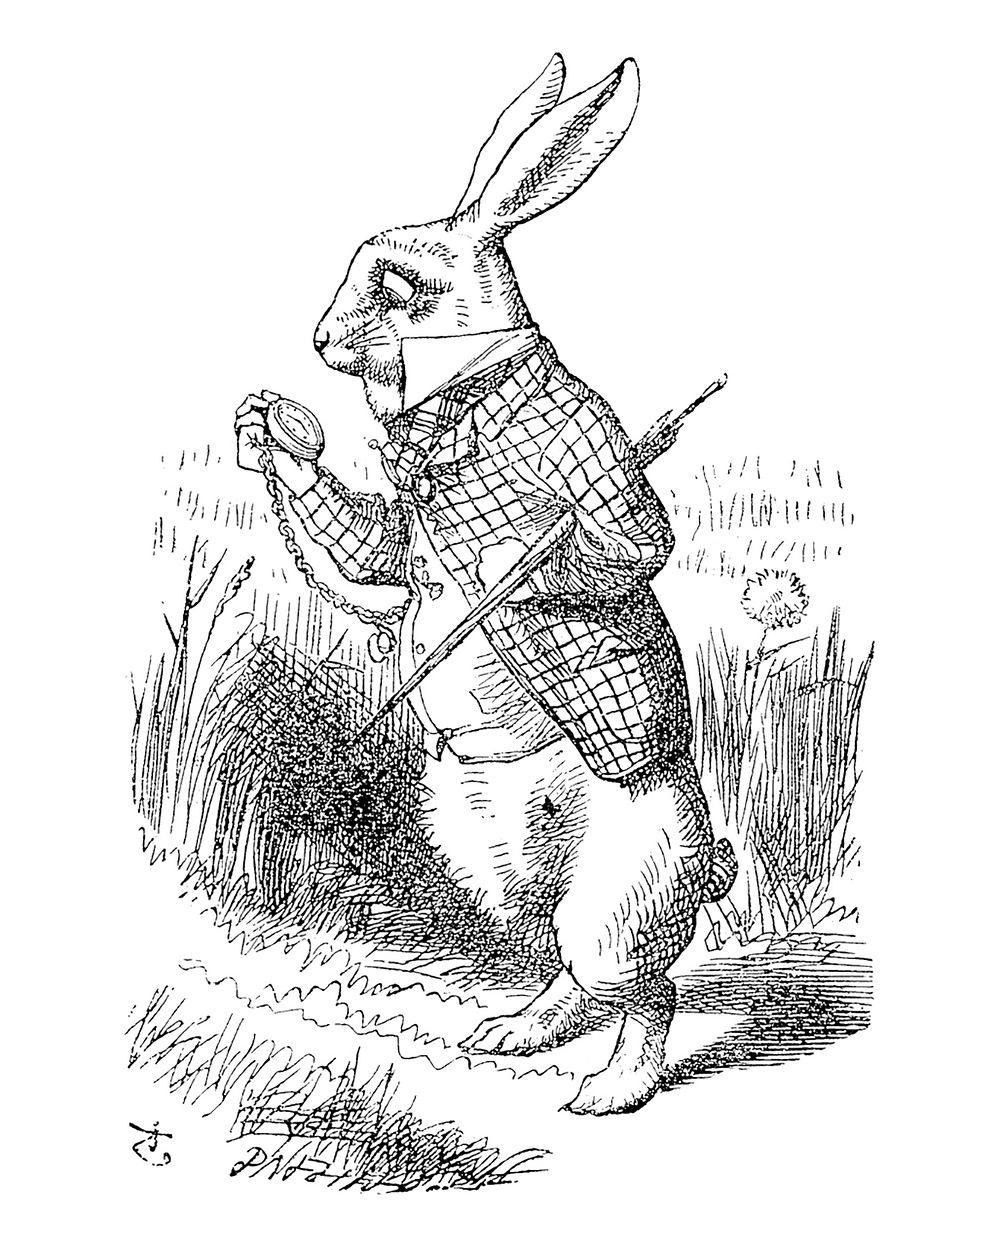 Illustration of the first page of Alice's Adventures in Wonderland (1865) by John Tenniel